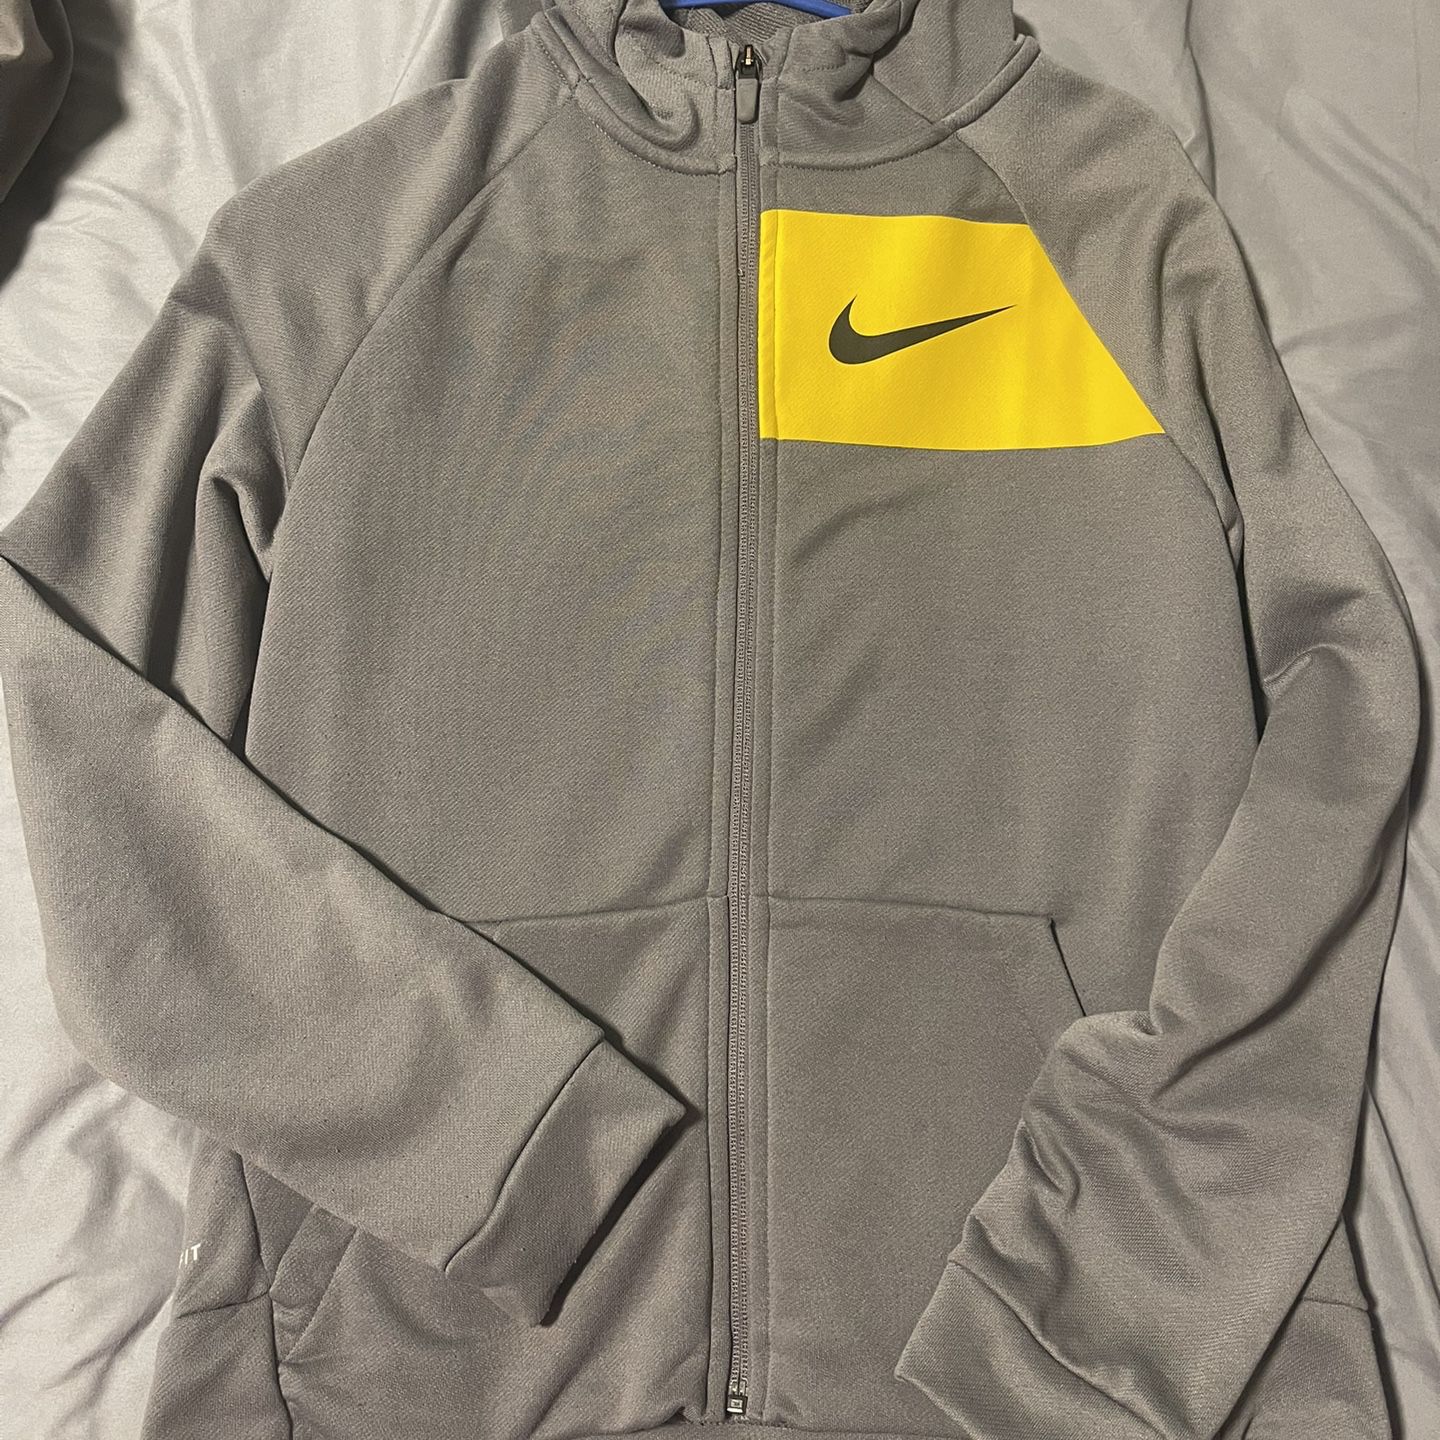 Lakers Nike Sweatshirt Size Large - New Without Tags for Sale in Fountain  Valley, CA - OfferUp